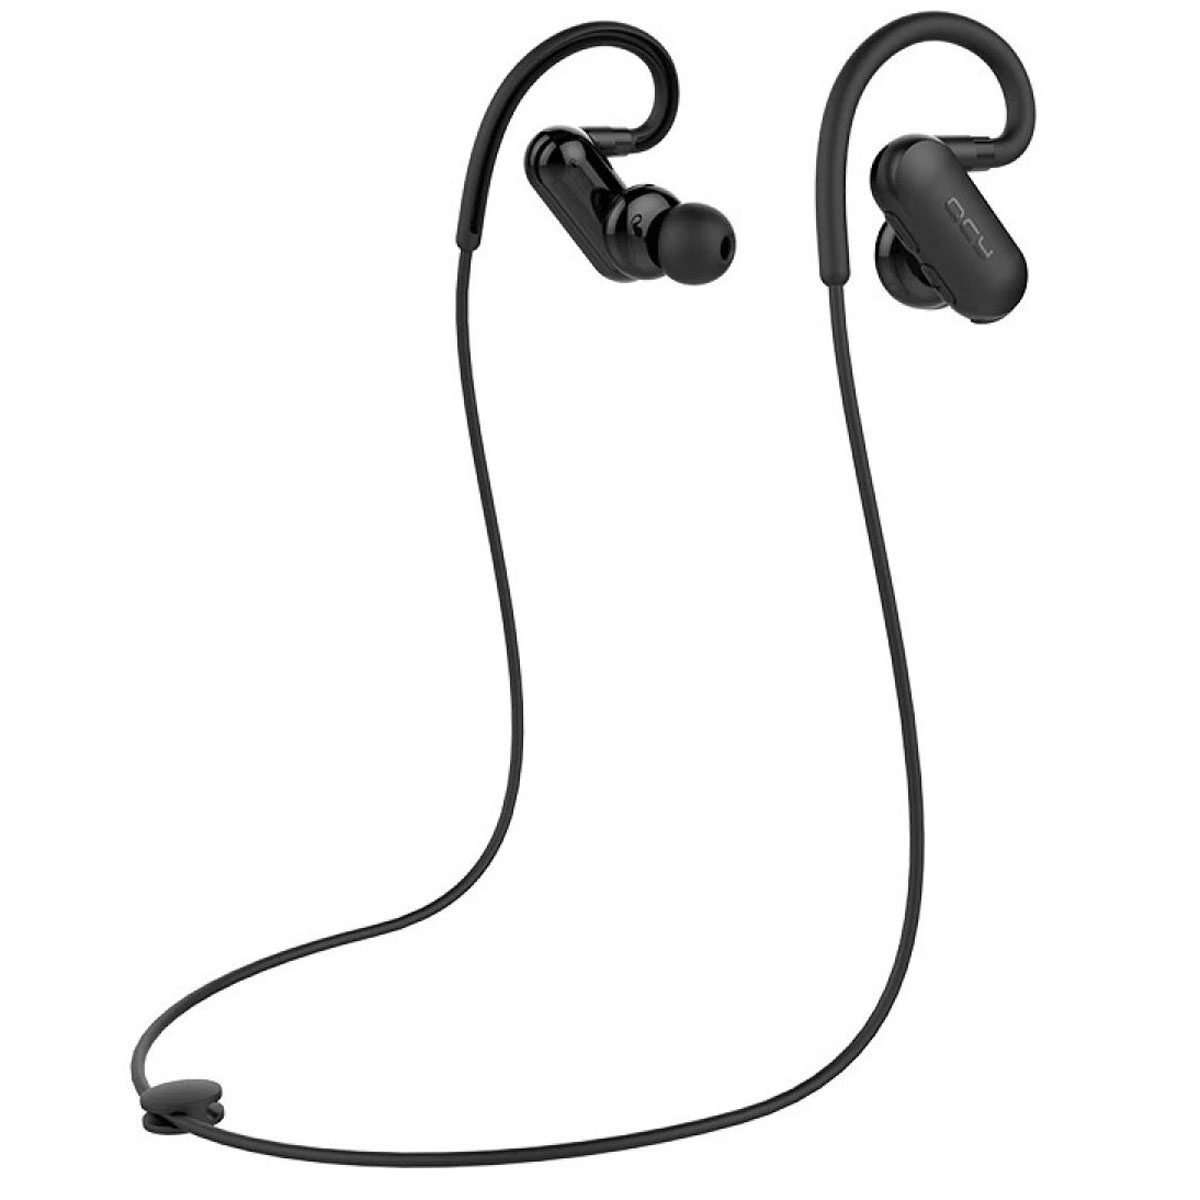 qcy qy31 bluetooth earphones